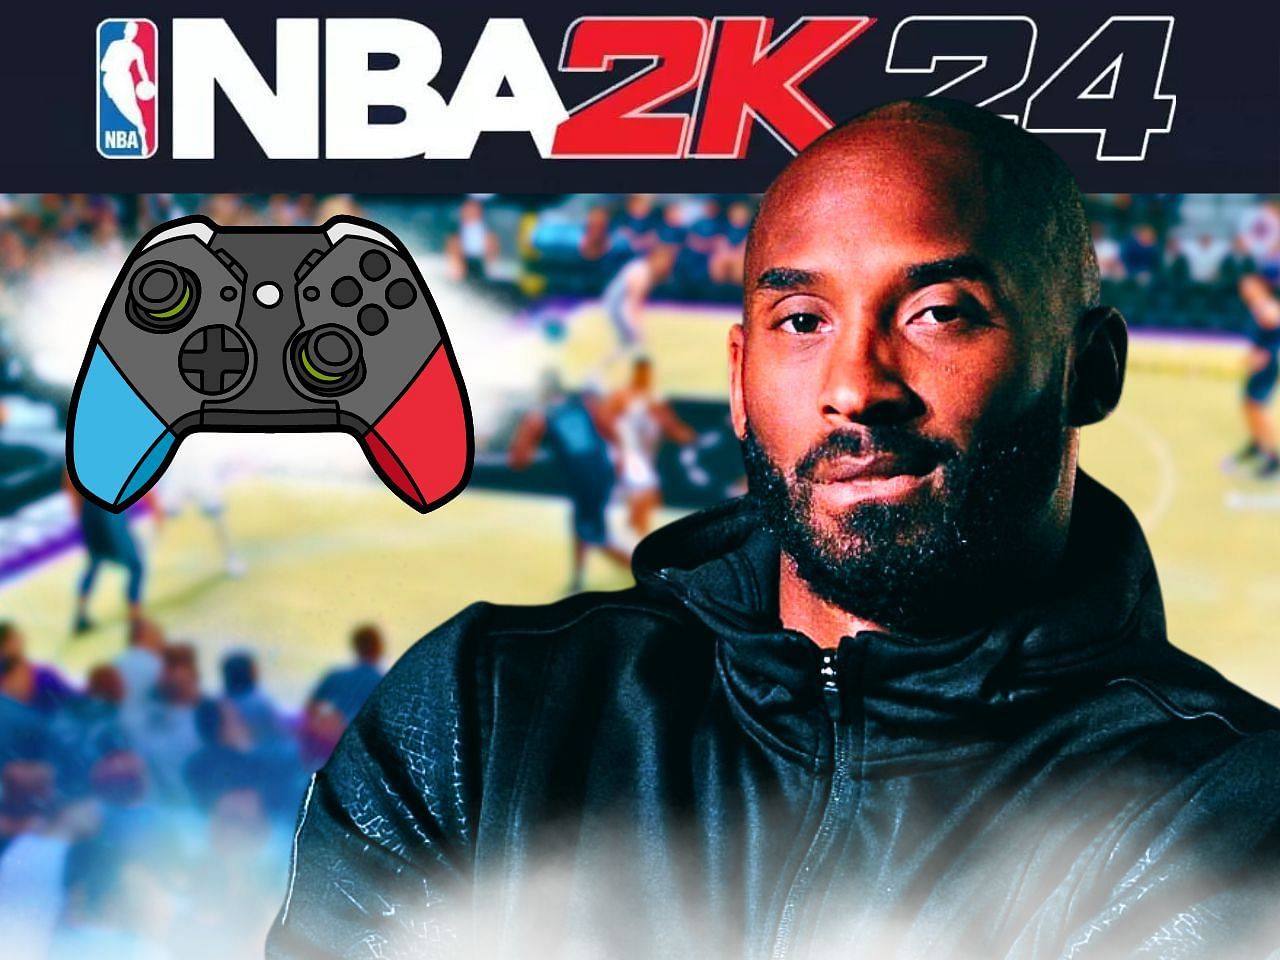 NBA 2k24 pre-order date, projected release date, and more